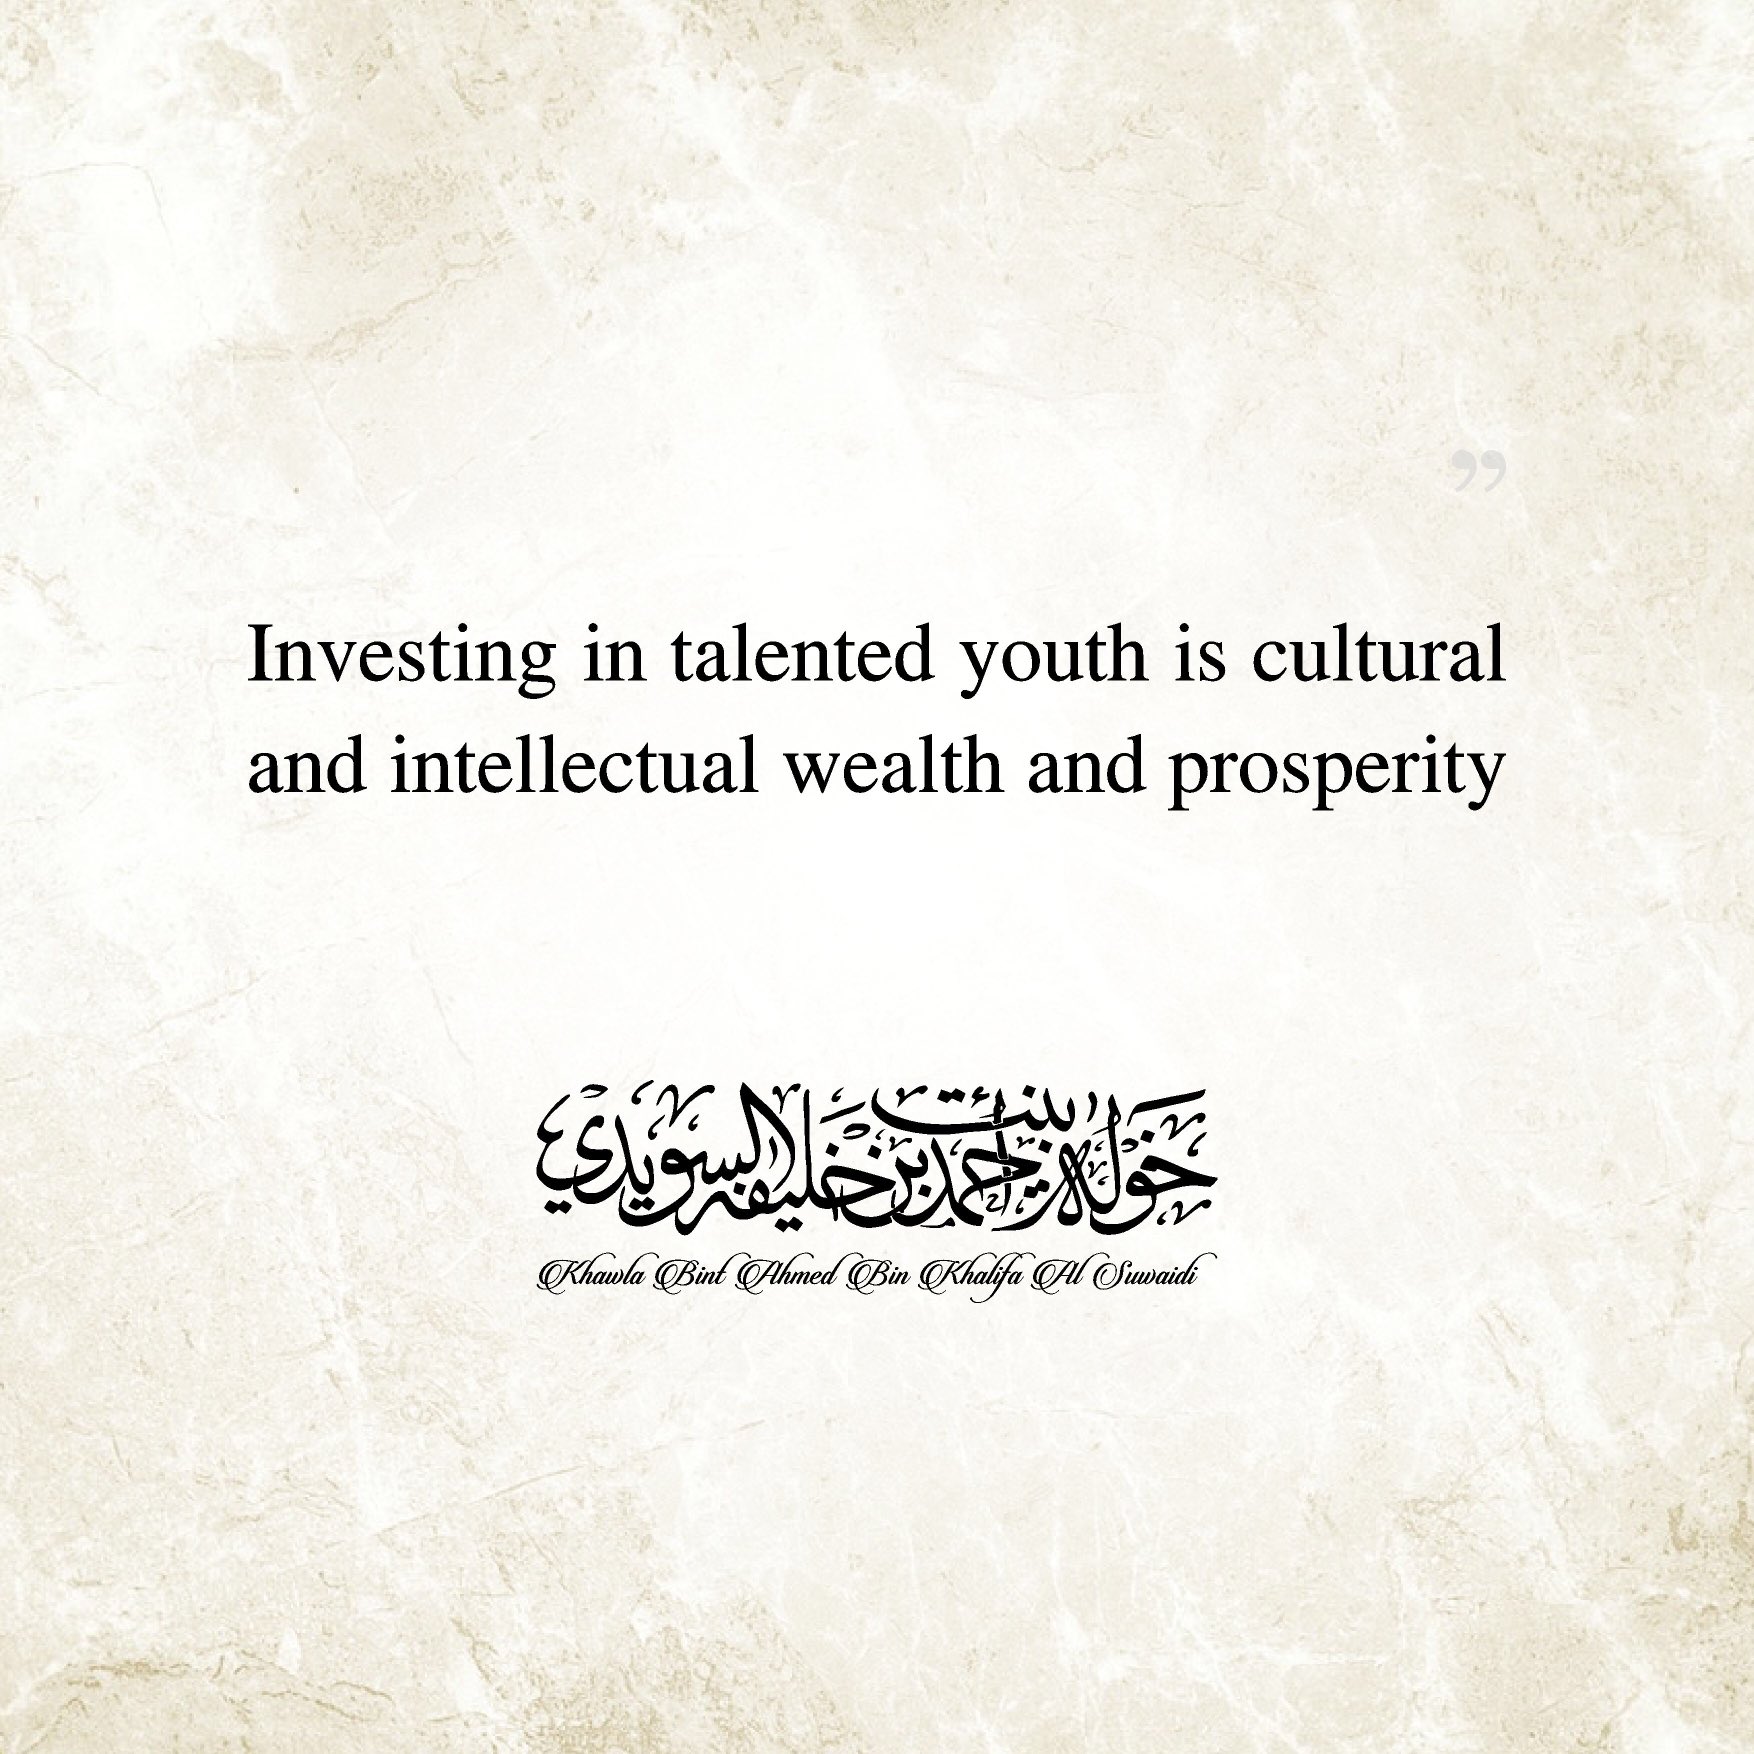 
	Investing in talented youth is cultural and intellectual wealth and prosperity
, Her Highness Sheikha Khawla Bint Ahmed Khalifa Al Suwaidi,Khawla Sheikha, Sheikha Khawla, خوله, Khawla Suwaidi,Khawla, khawla al sowaidi,khawla sowaidi,Khawla Al Suwaidi,National Poetry, Poetry, Arabic poems, Arab poet,Arab calligrapher,خوله السويدي, khawla alsuwaidi,khawla al suwaidi, Arab artist,peace and love exhibition at saatchi gallery london, peace & love,arabic poem,arabic poetry,peace and love, peace ,love, خوله  السويدي ,khawla, خوله السويدي , خوله بنت احمد بن خليفه السويدي , خوله   احمد   السويدي  